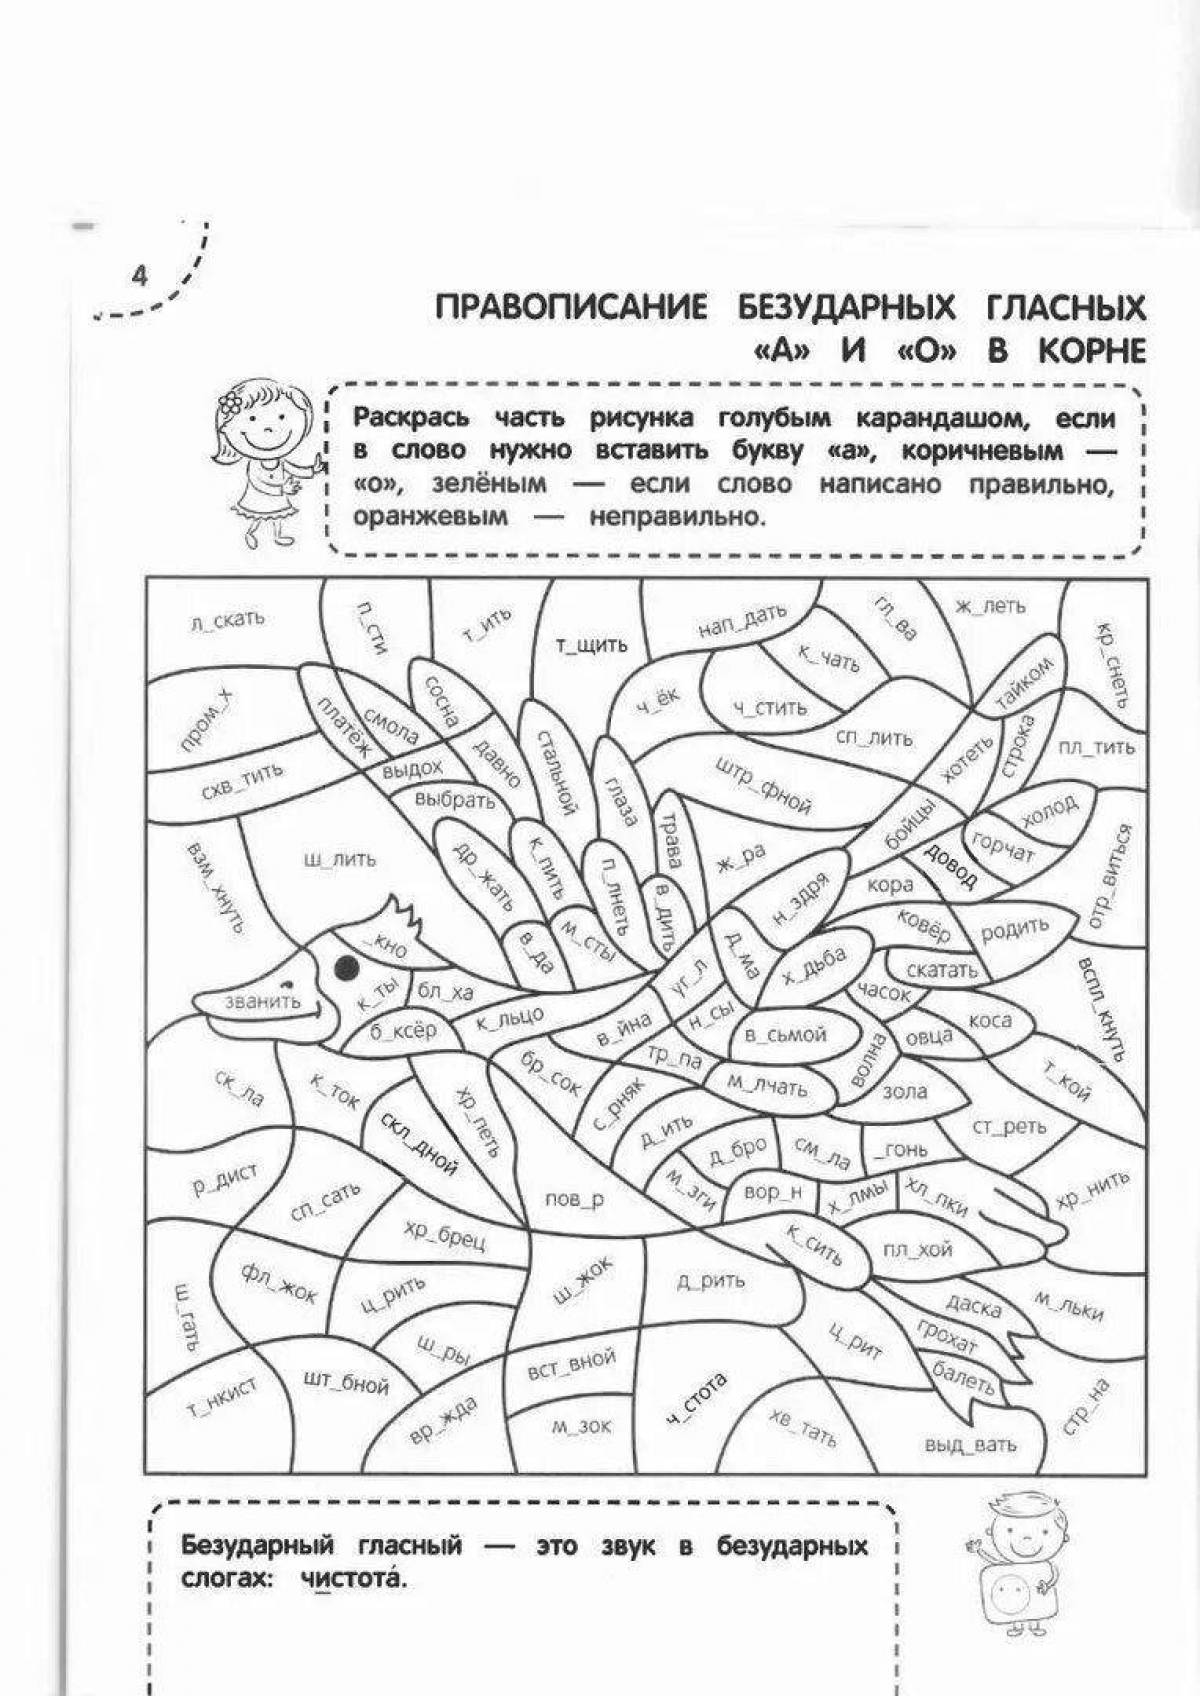 A fascinating coloring book for 2nd grade with missing letters in Russian